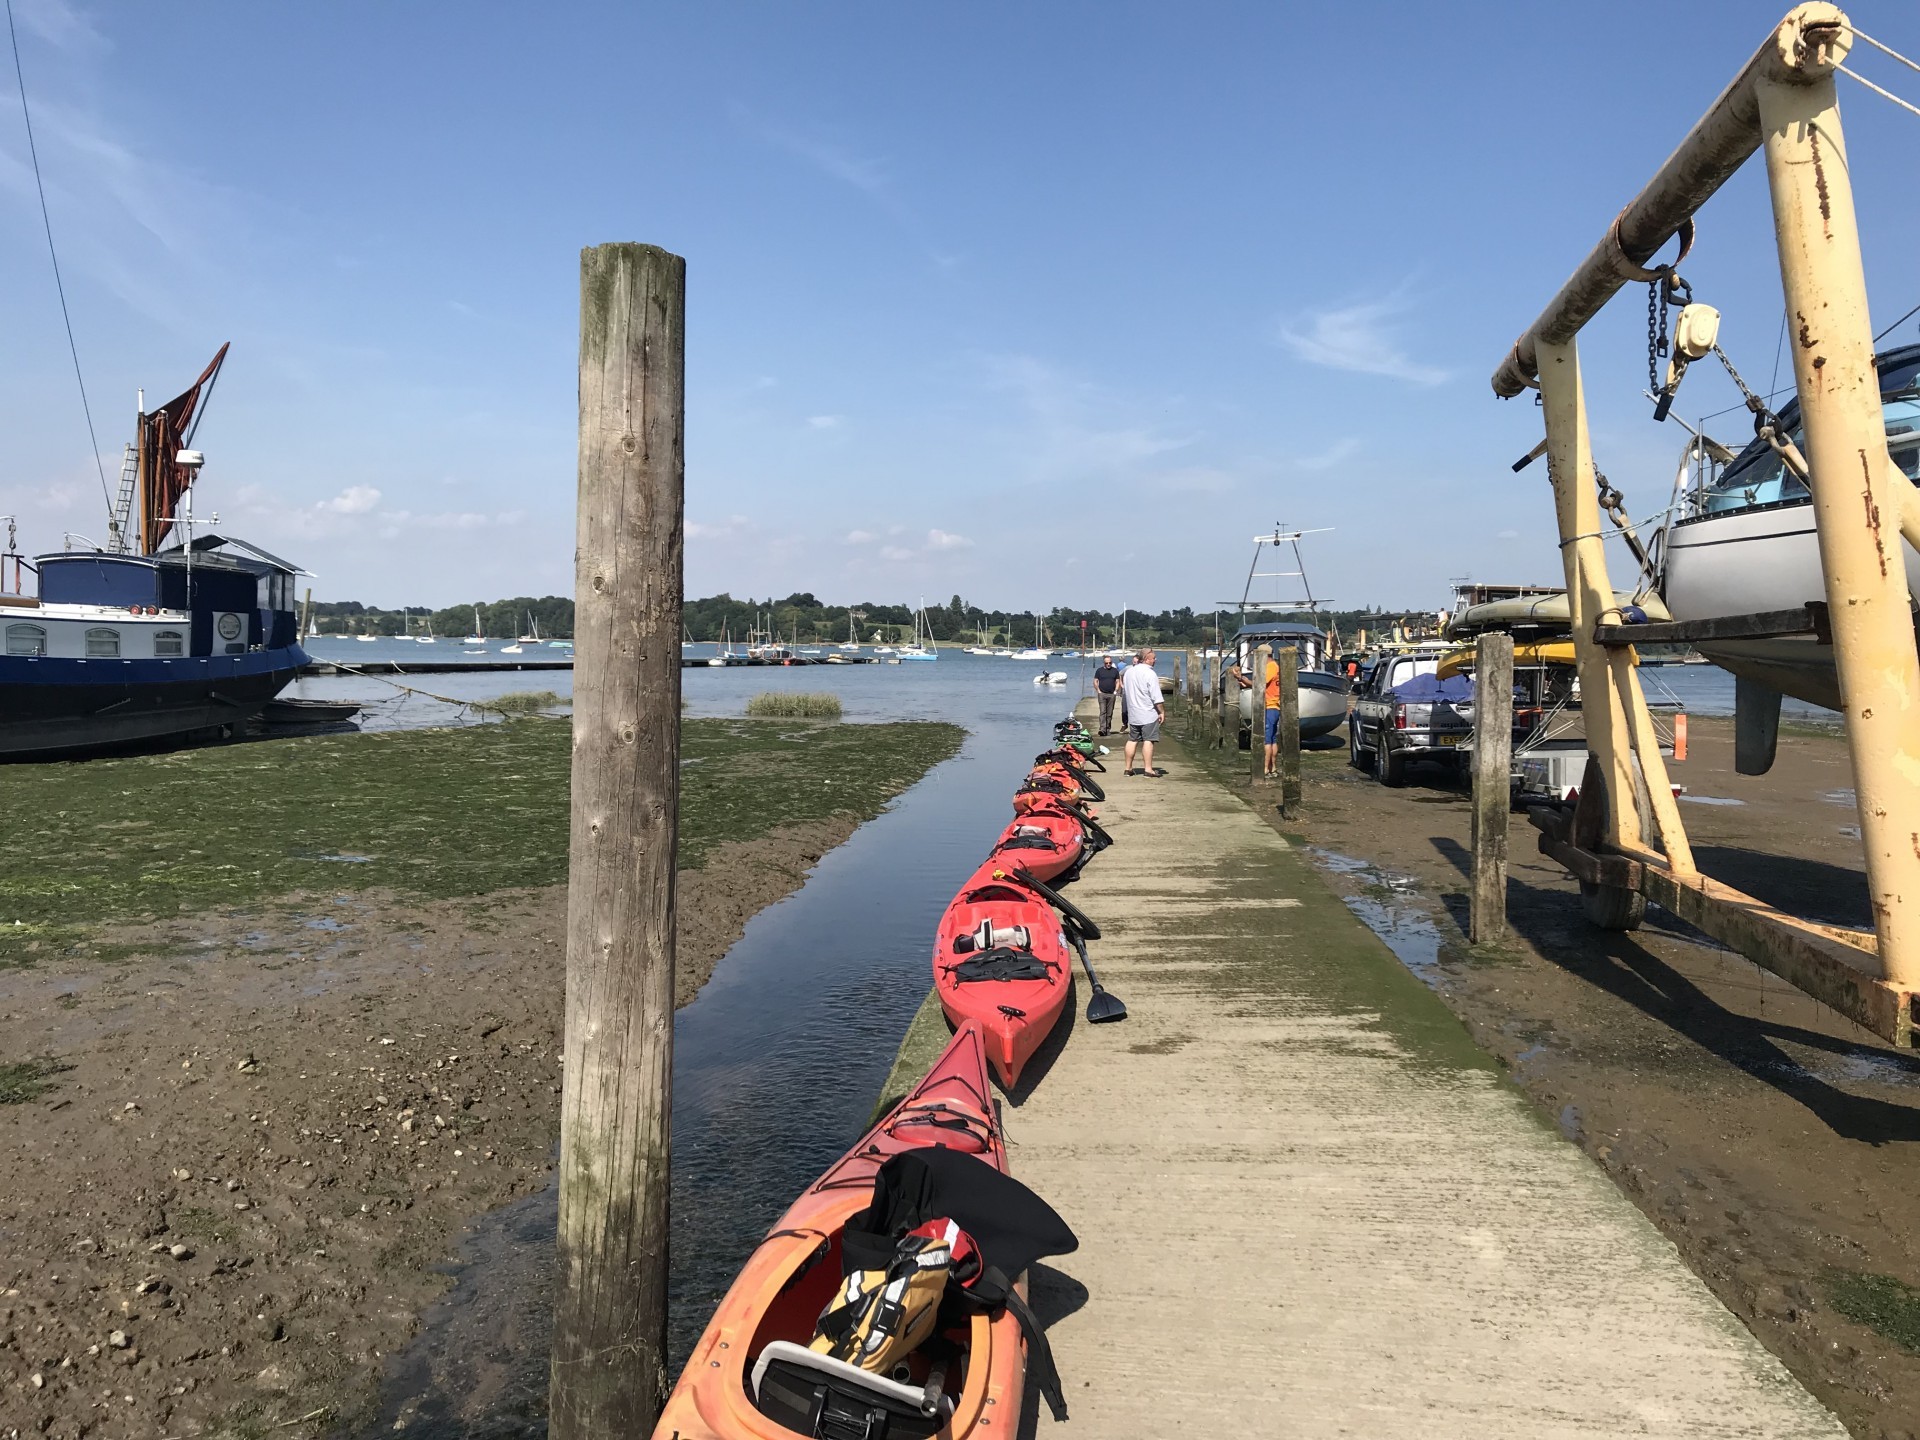 Kayaks on the slip awaiting launch on the Orwell estuary during the Discover Kayaking day trip.